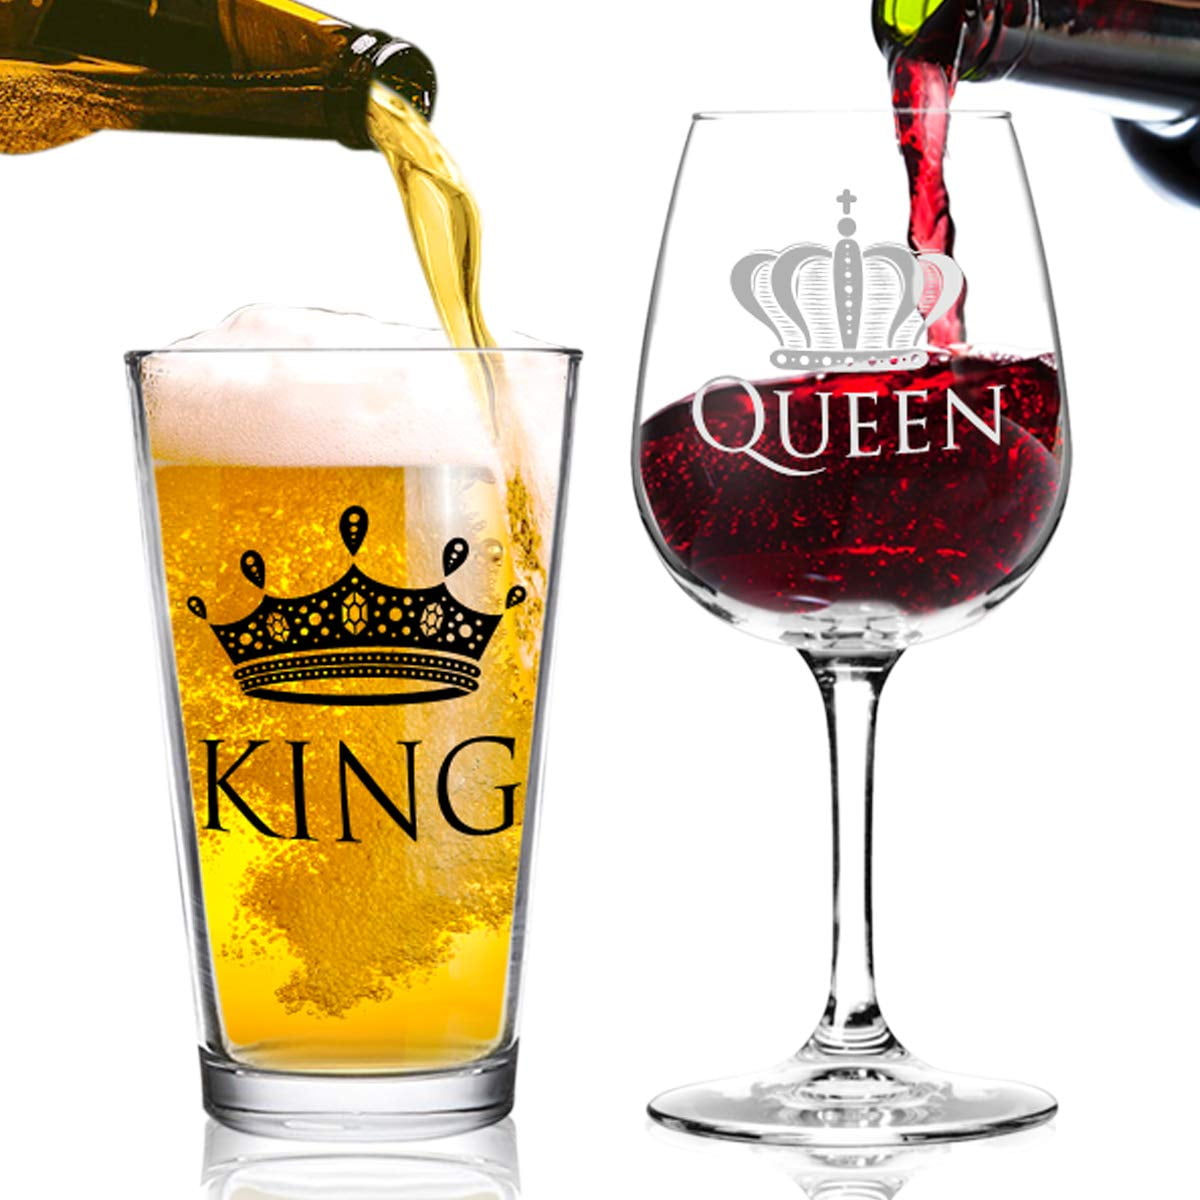 king queen crown glasses king and queen beer glasses set of 2 his and her gifts 